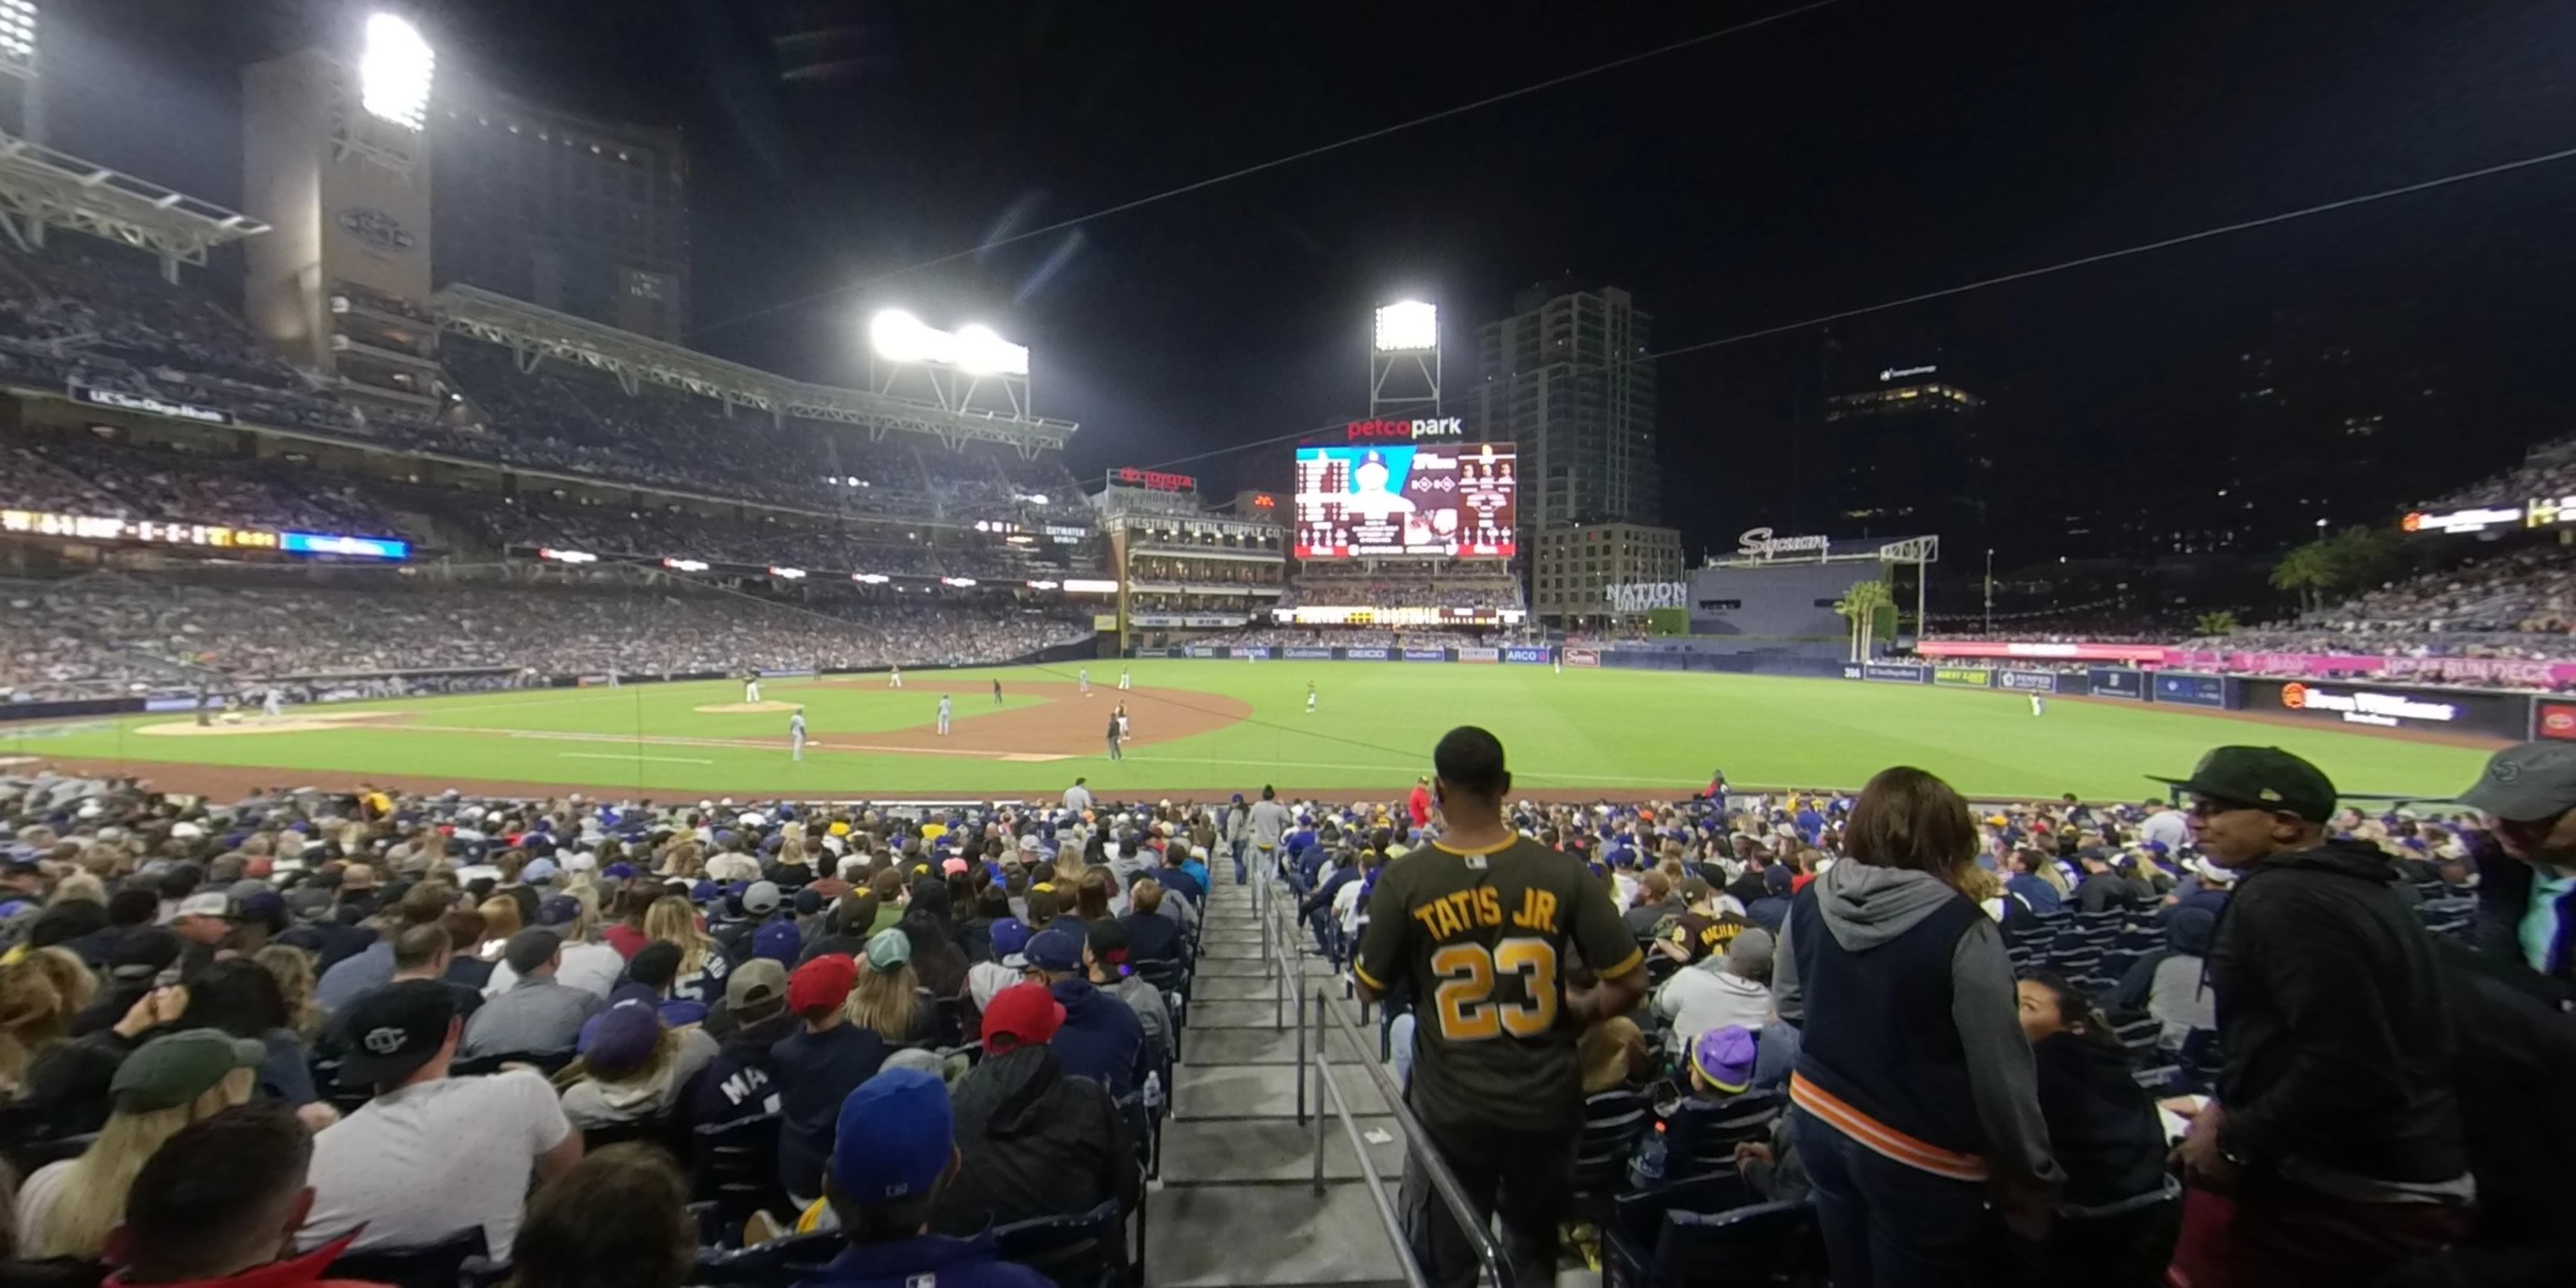 section 113 panoramic seat view  for baseball - petco park